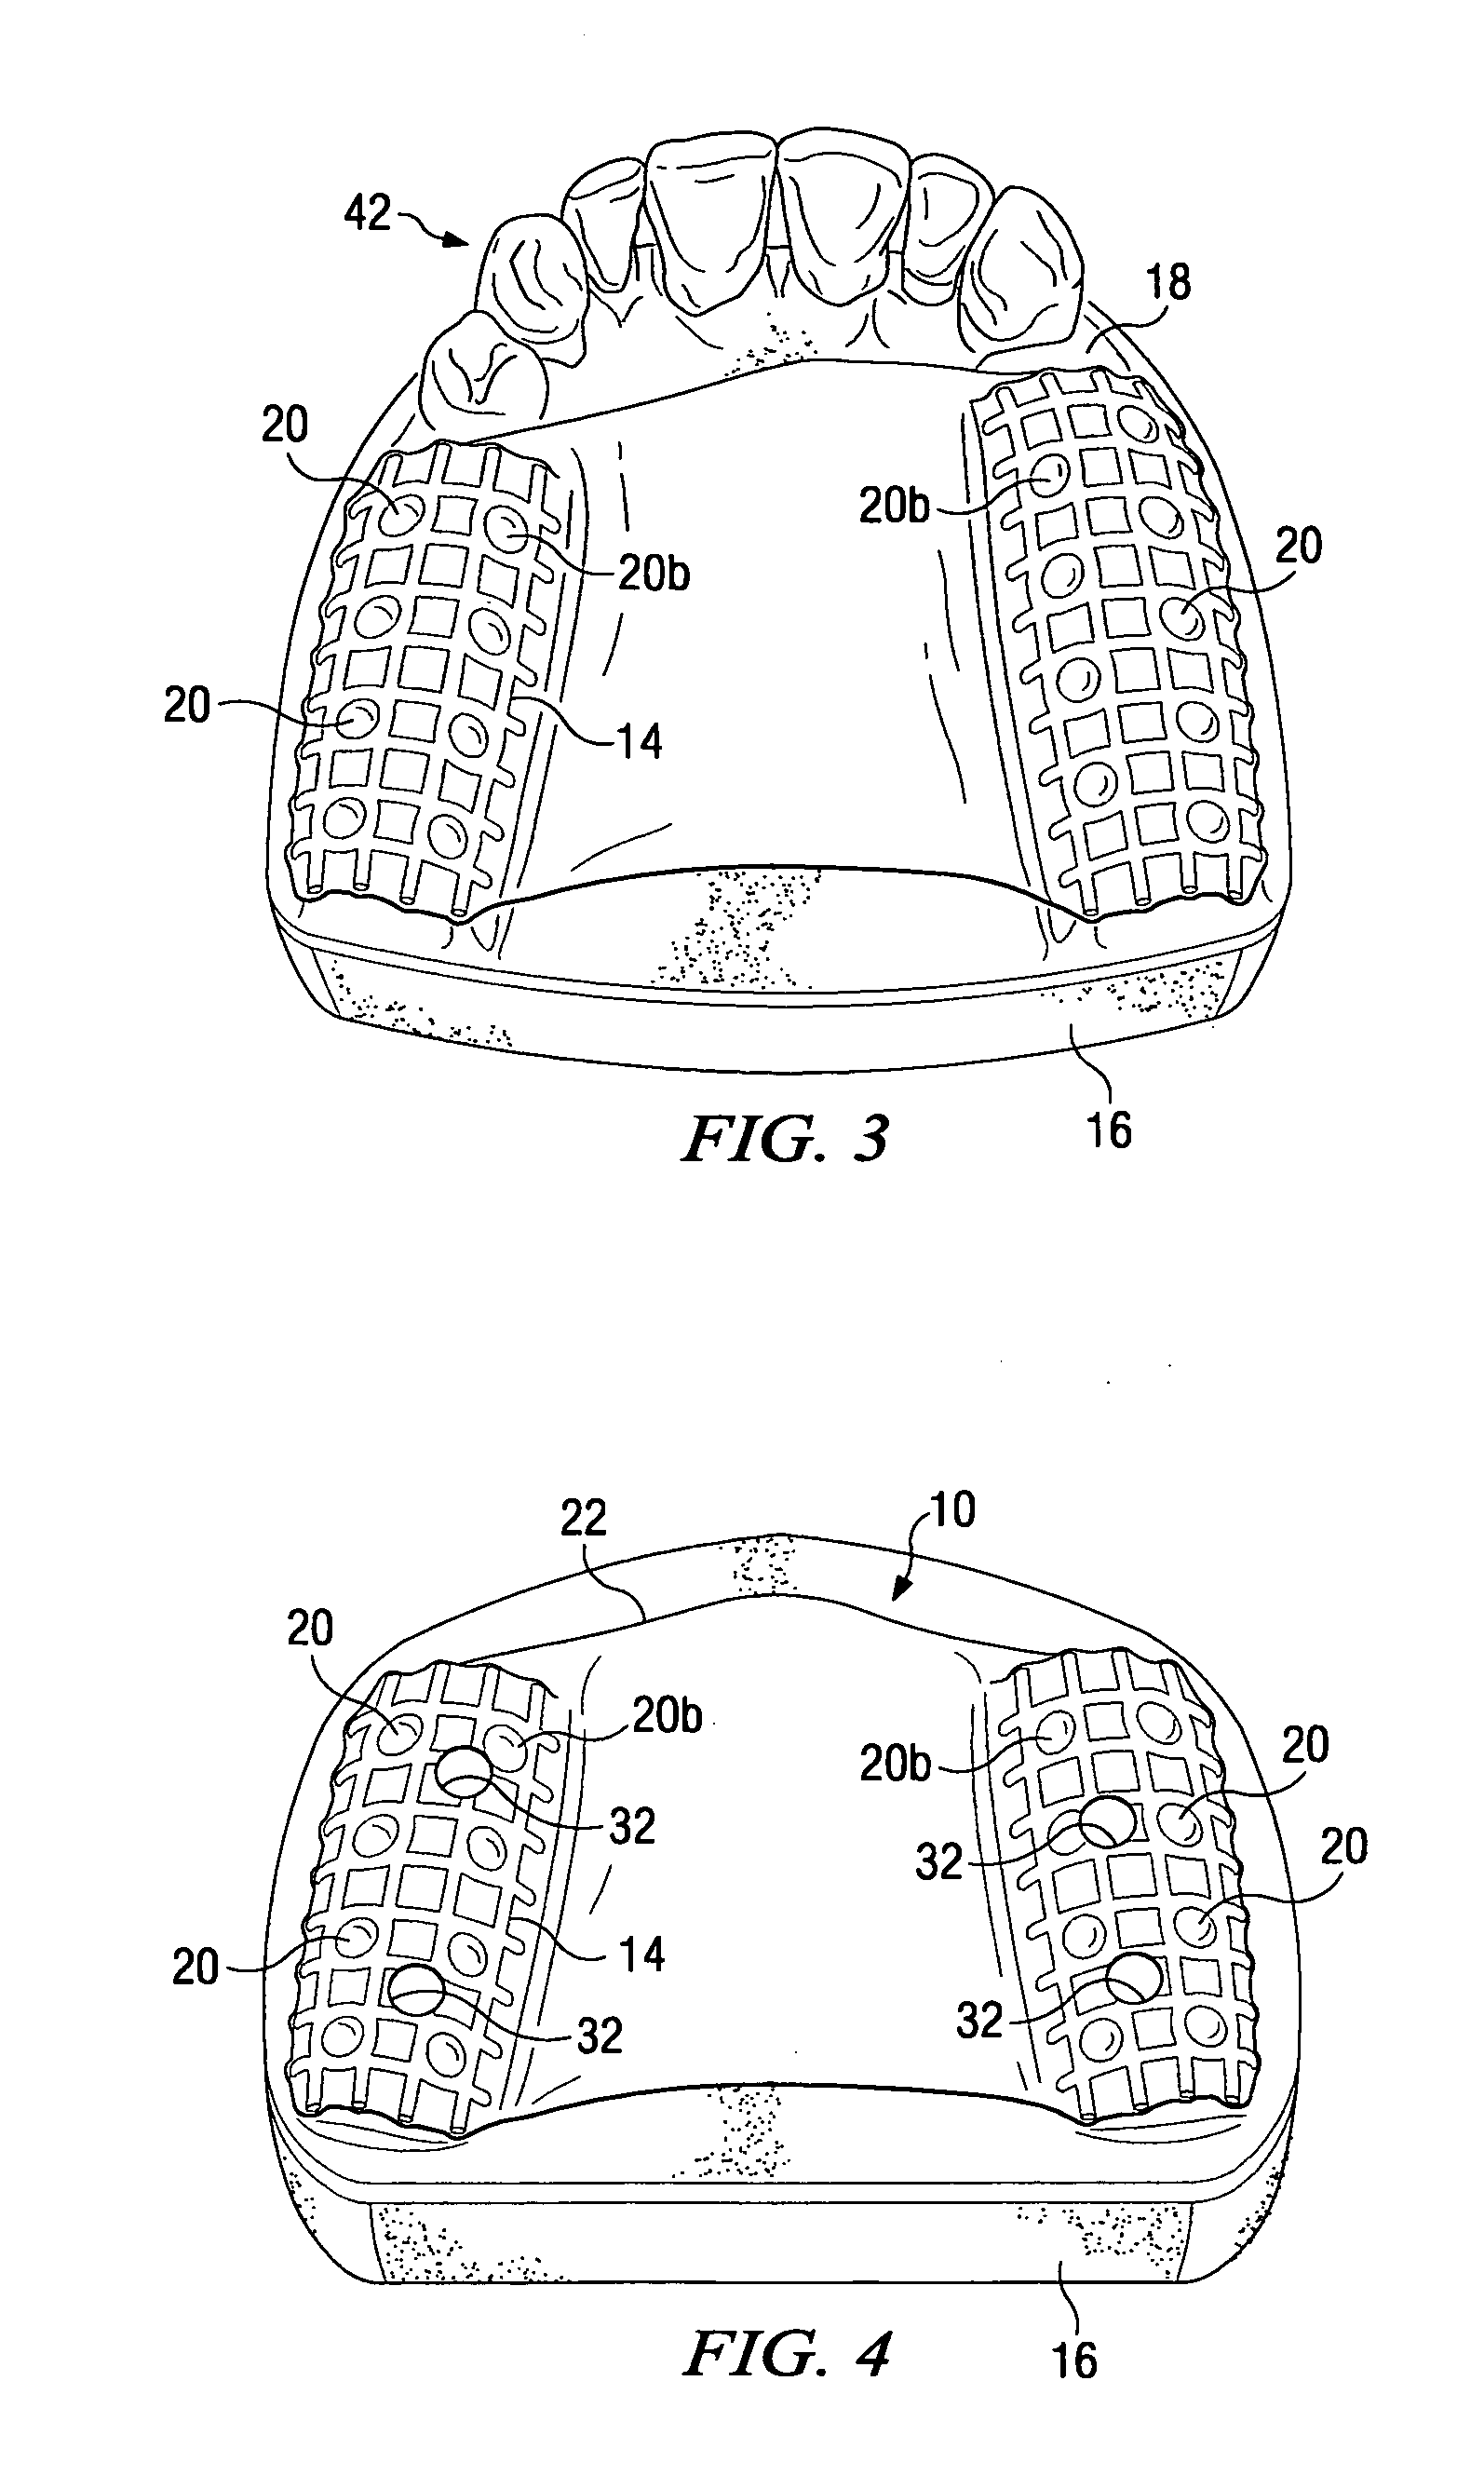 Dental implant placement locator and method of use